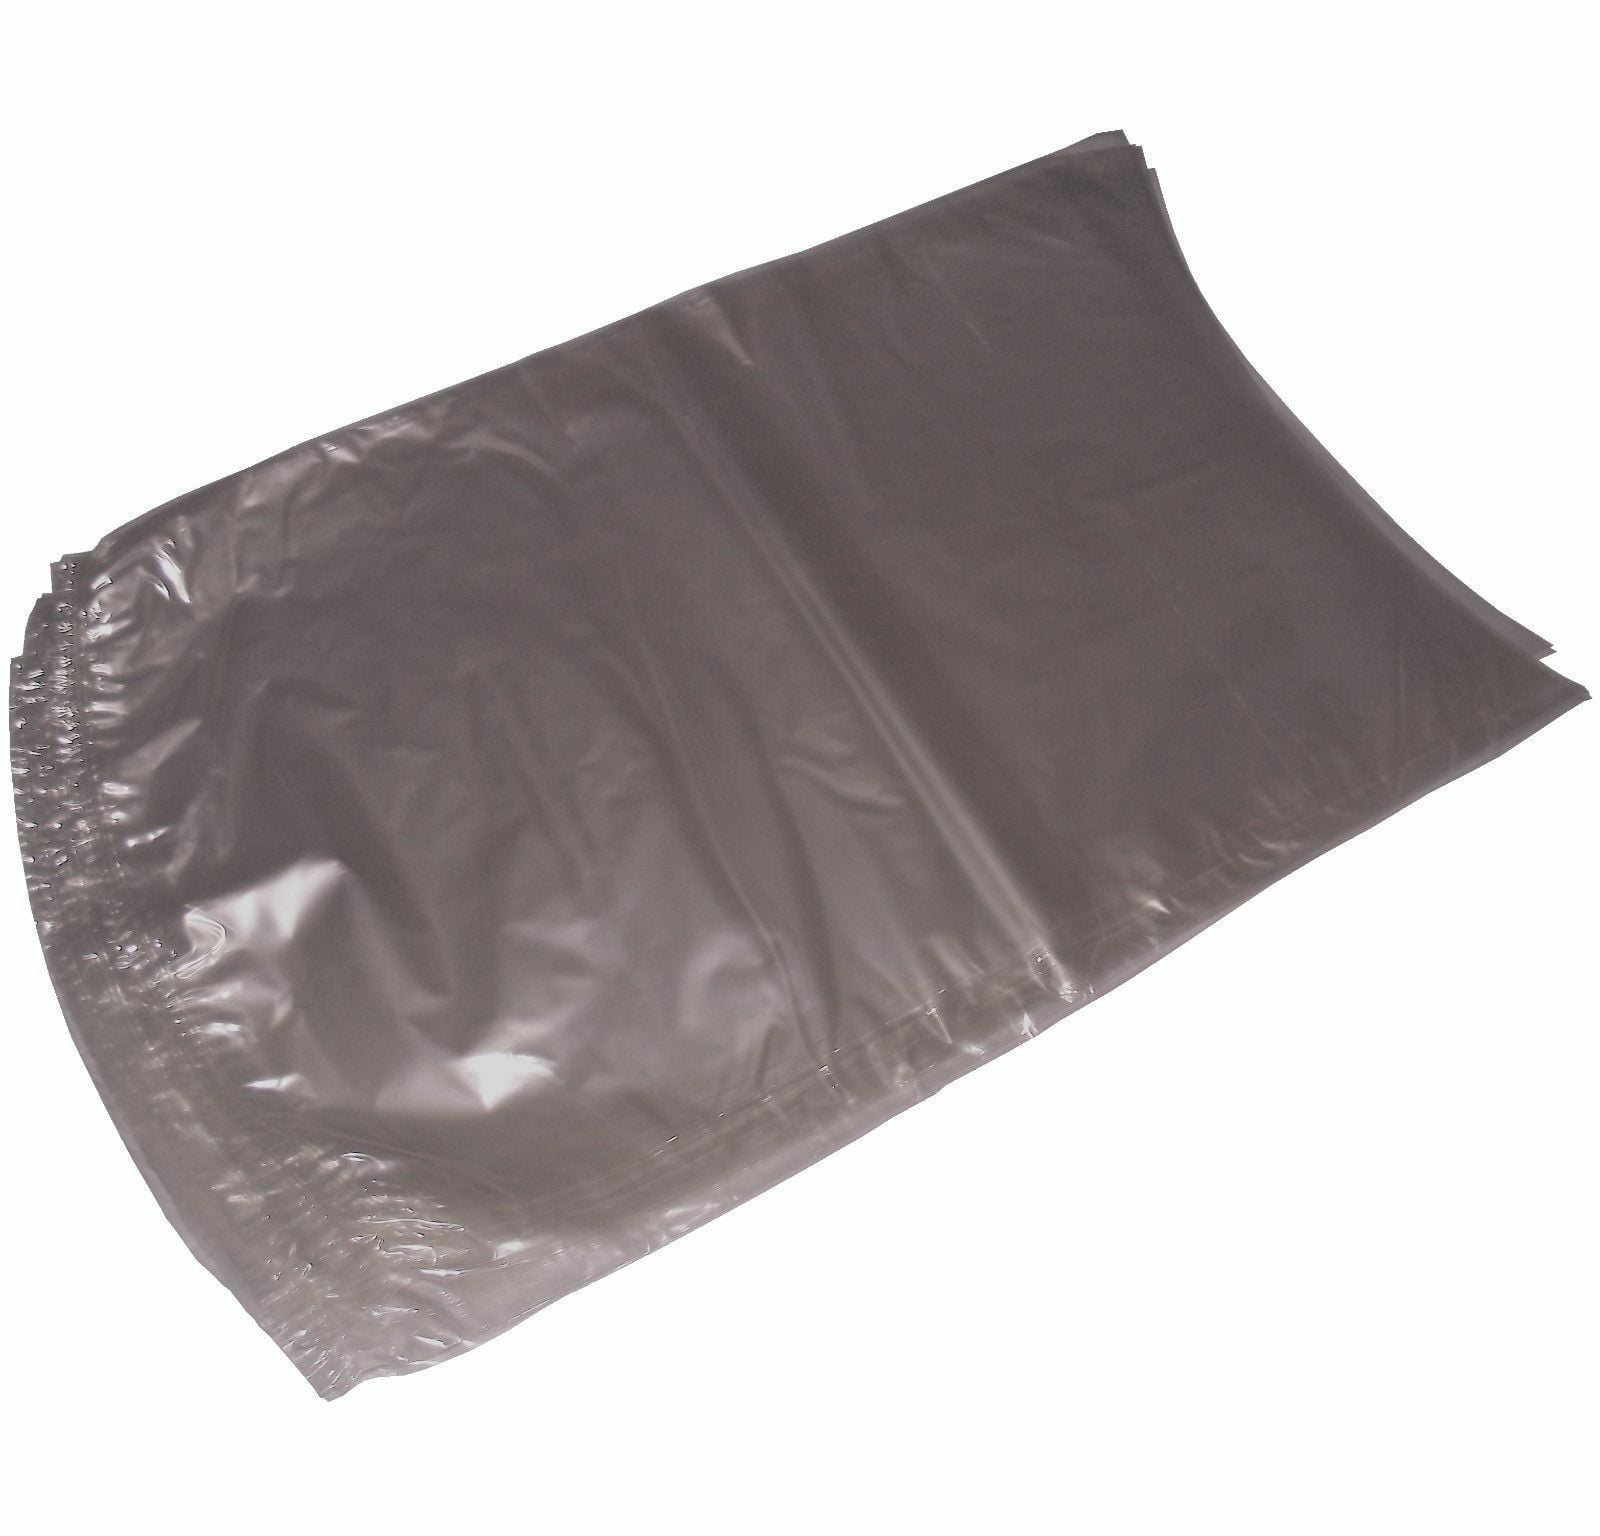 Smaller Shrink Bags for Poultry Parts